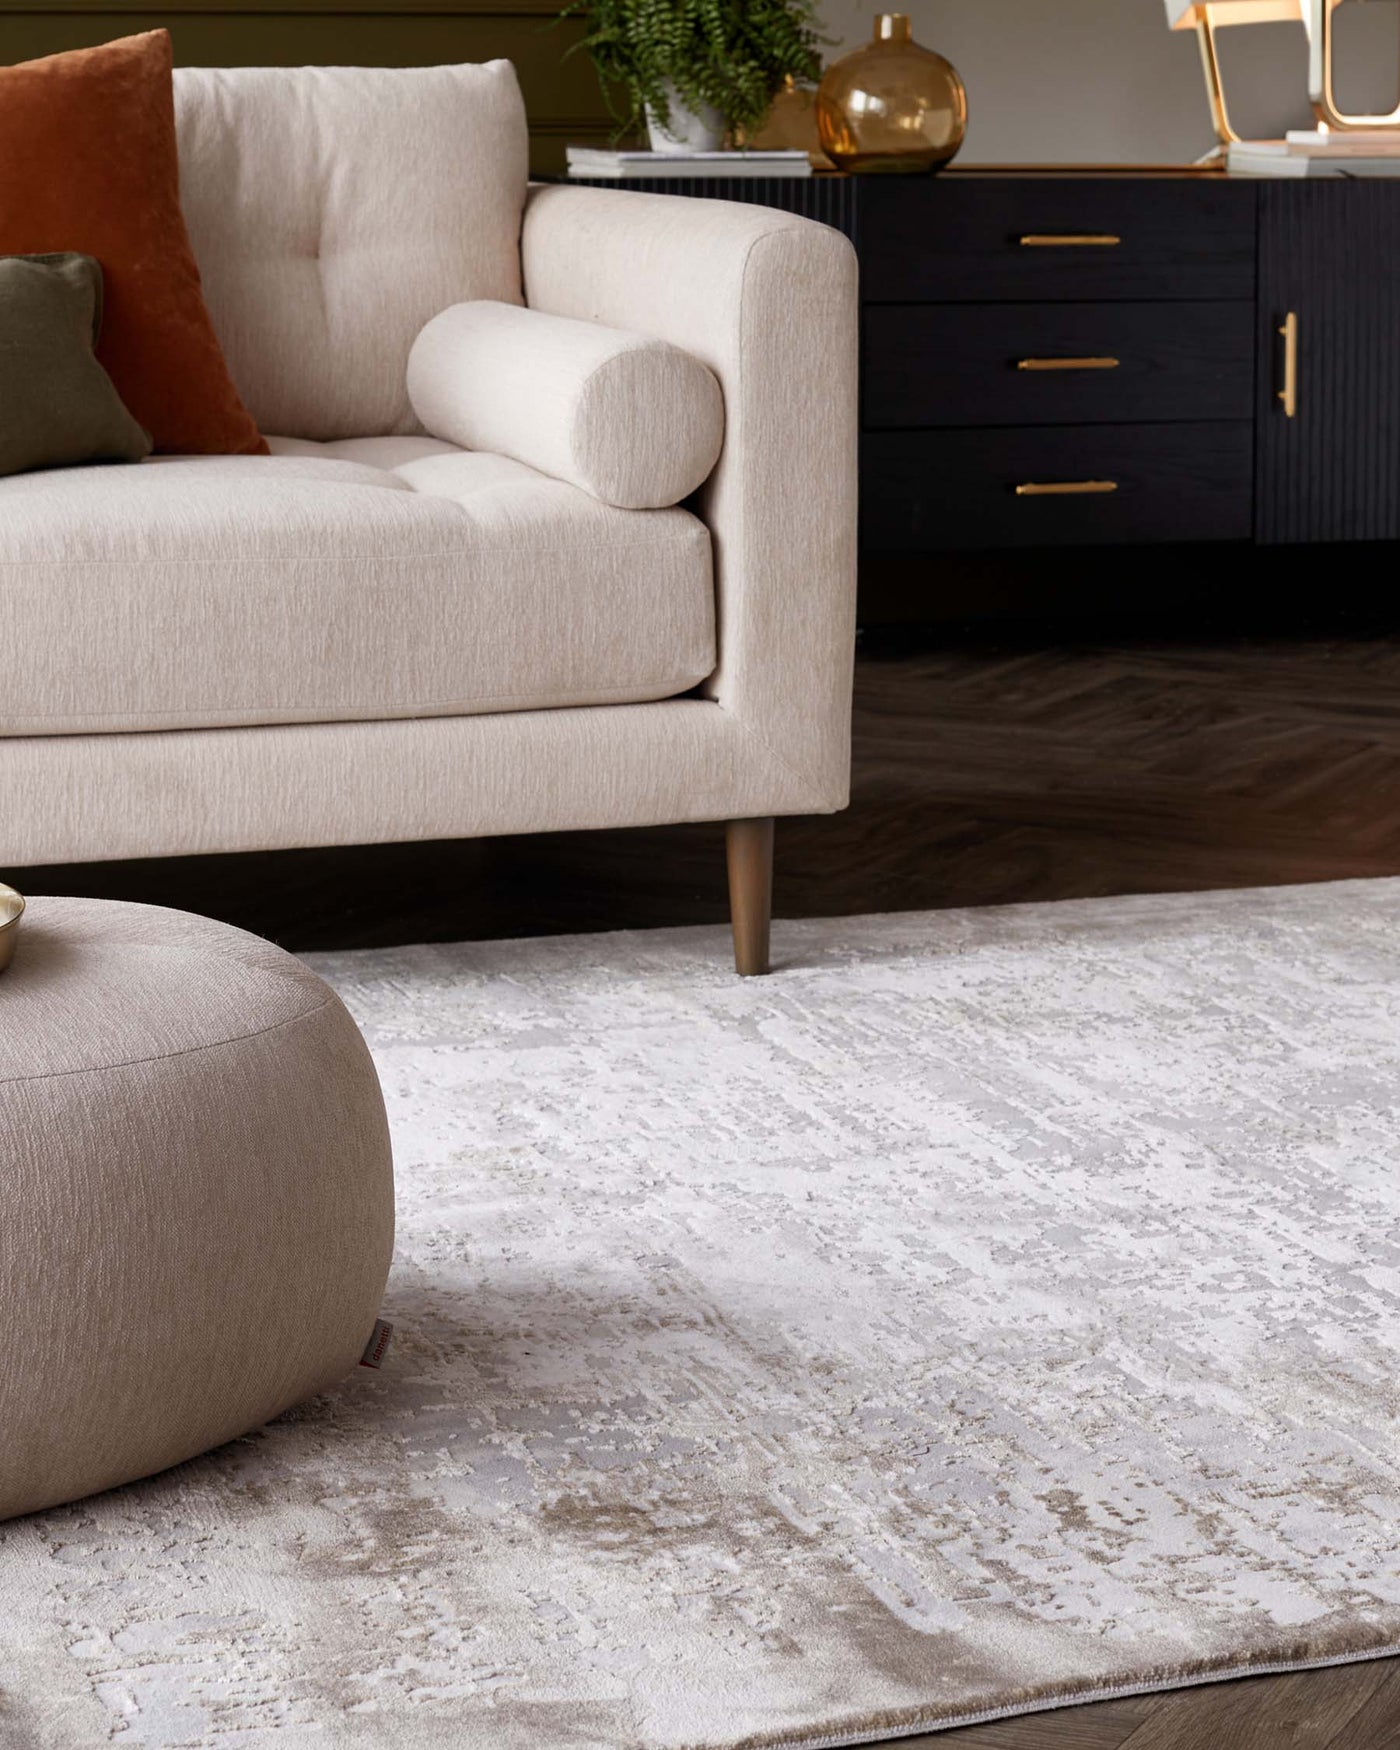 Beige contemporary sofa with a minimalist design featuring round wooden legs and a smooth fabric finish. Paired with a matching round beige ottoman. A sleek dark wood sideboard with gold handles stands in the background atop a textured white area rug with a subtle pattern.